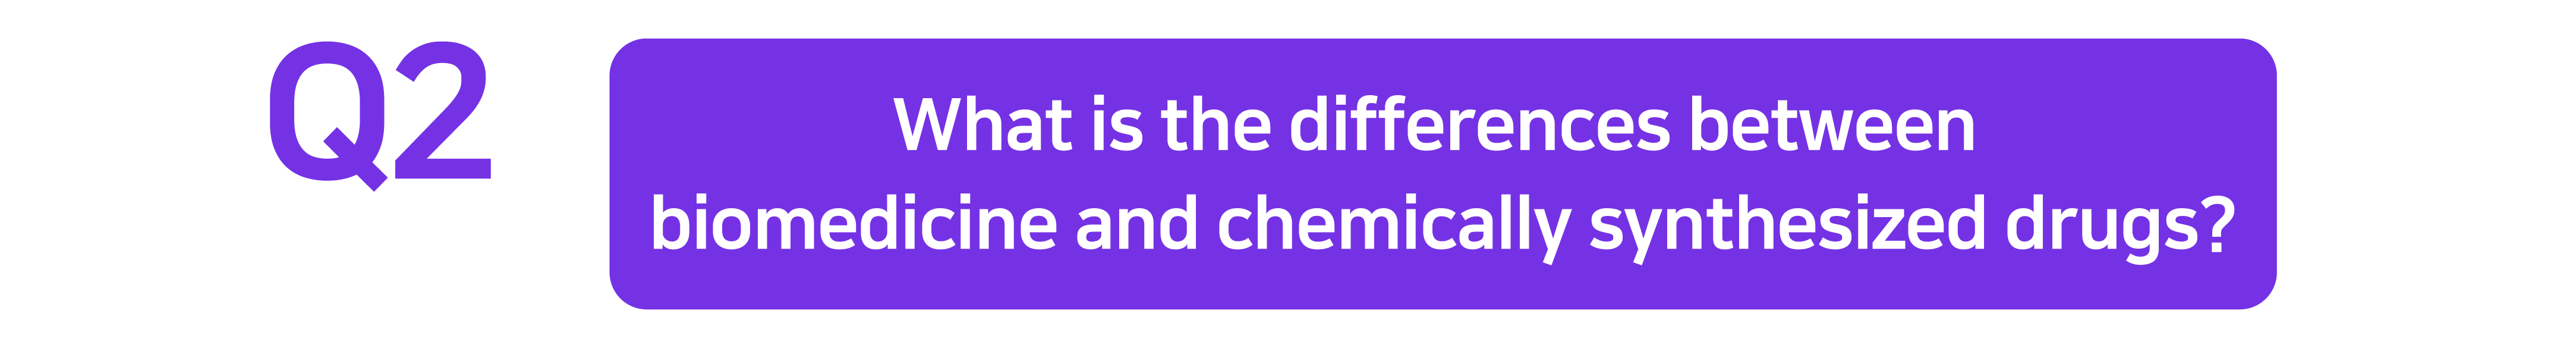 Q2. What is the differences between biomedicine and chemically synthesized drugs?